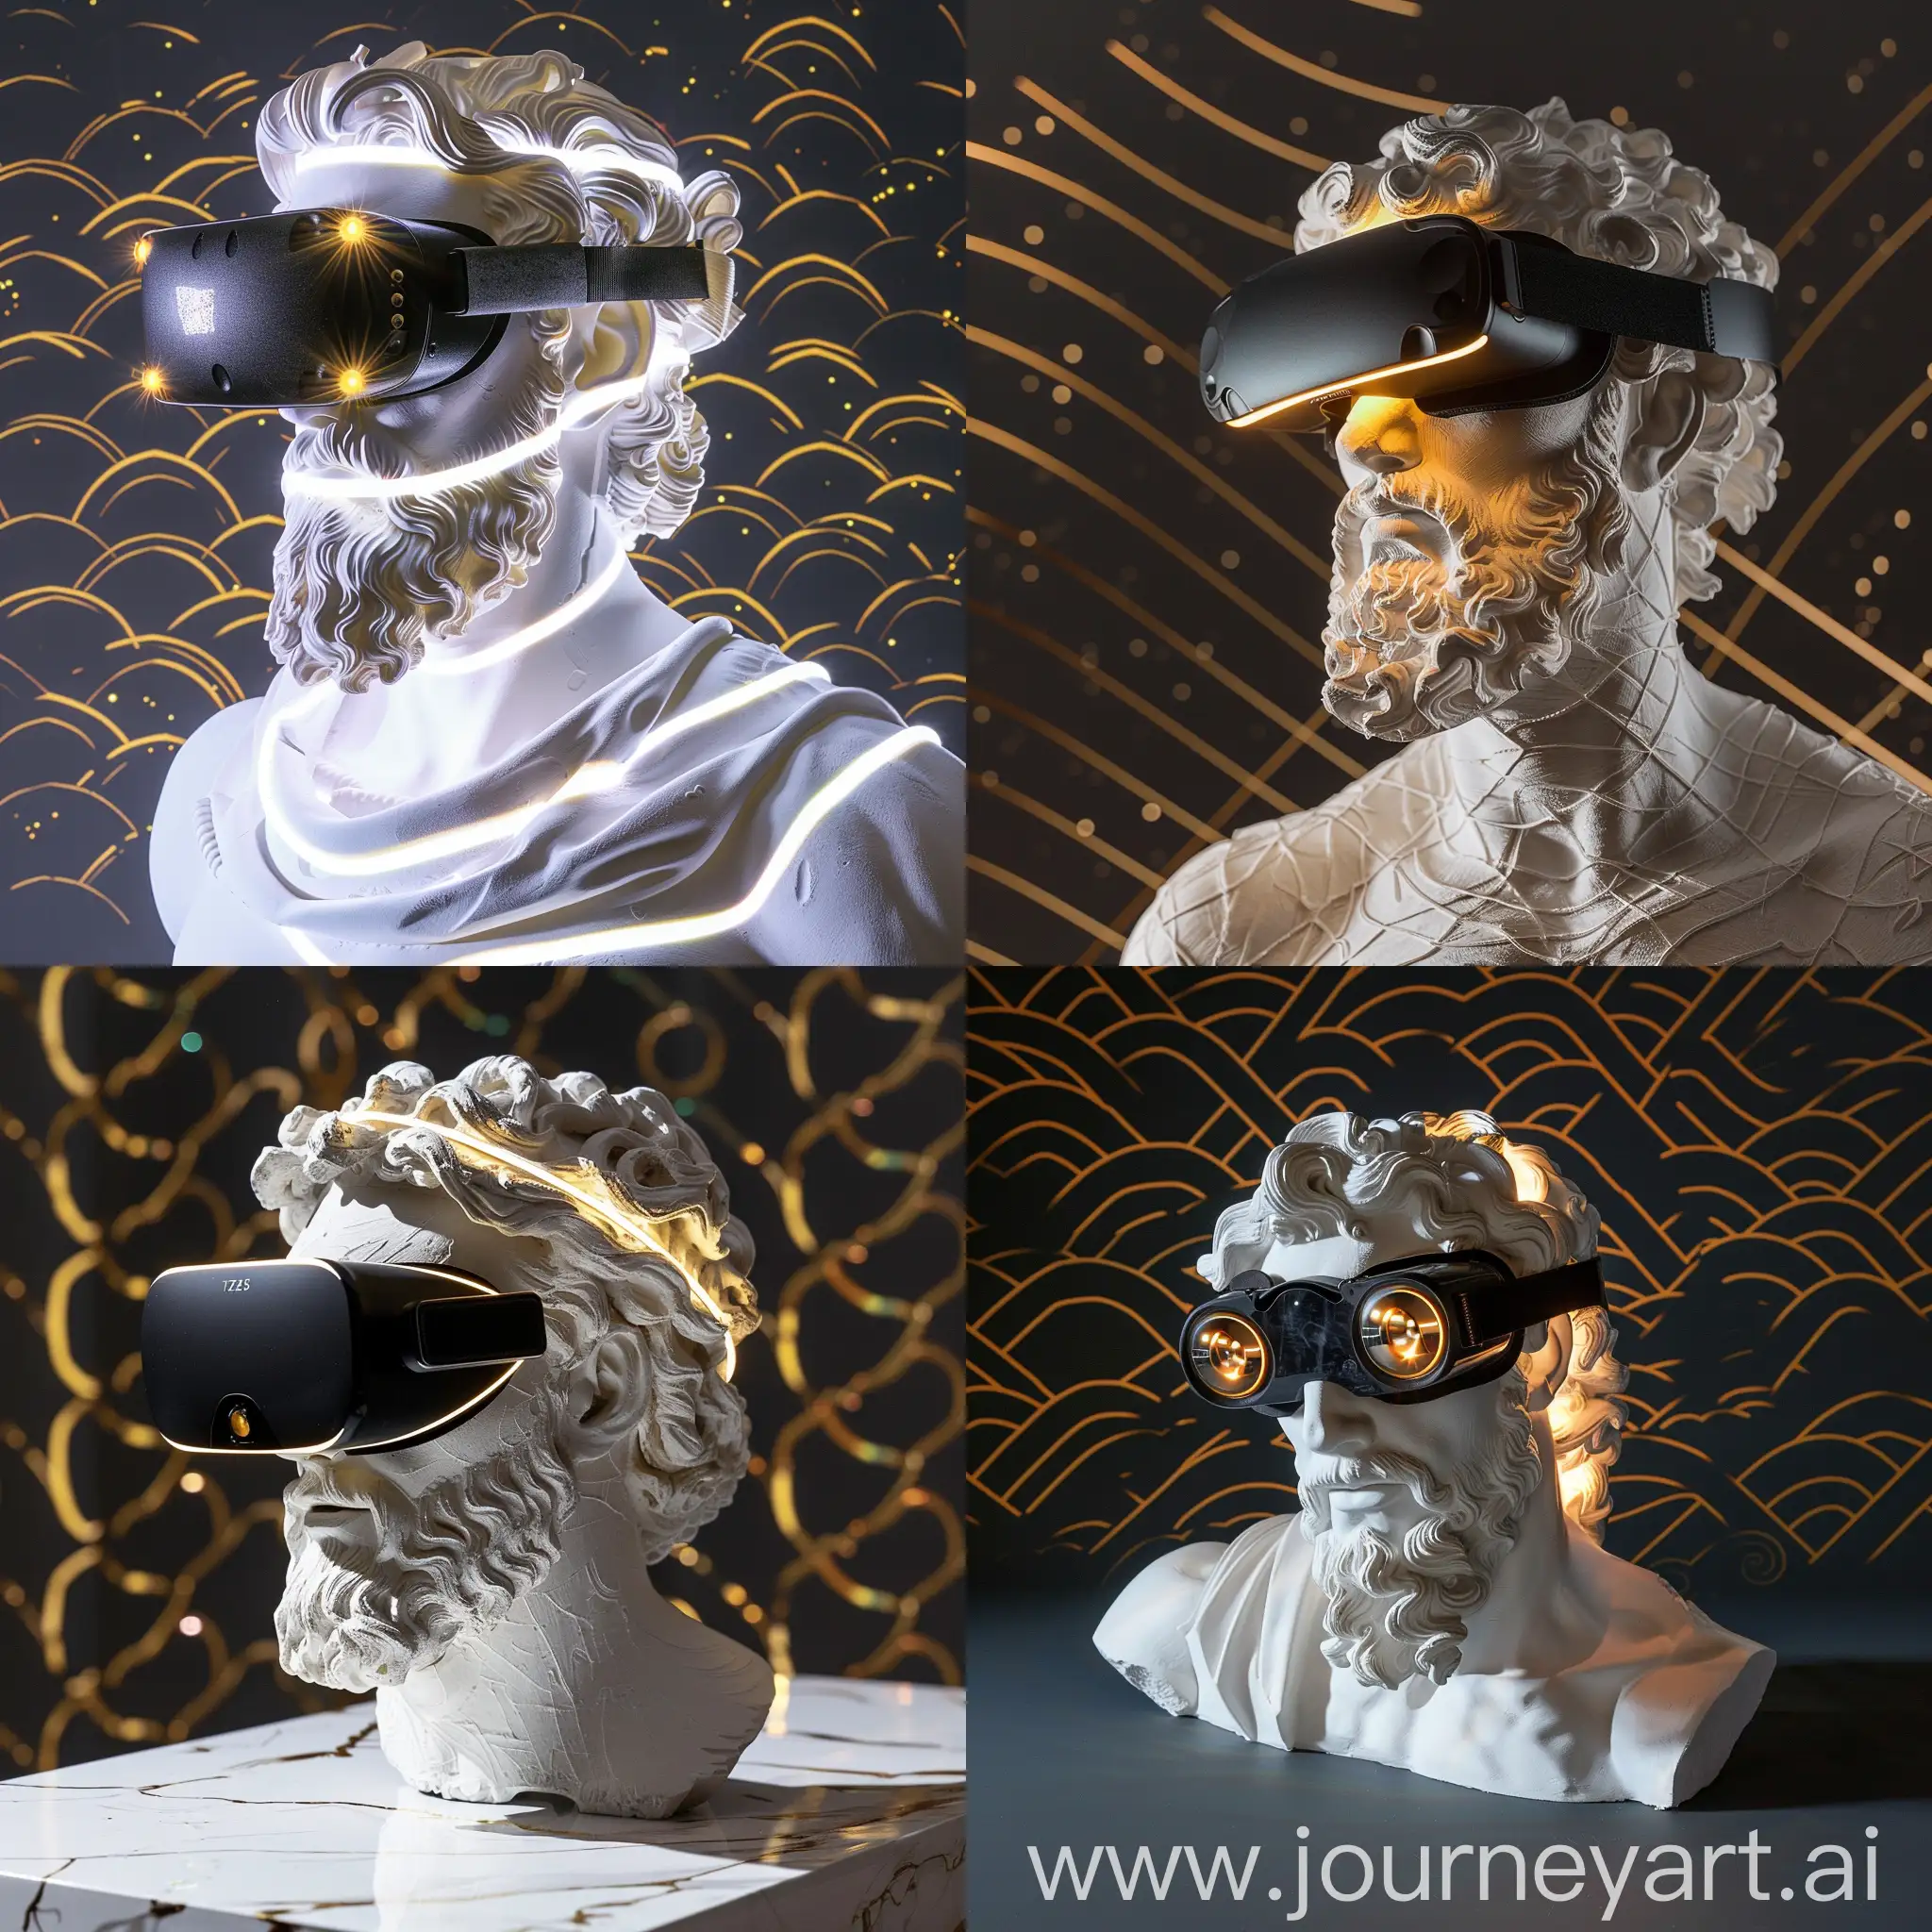 Dreamy-Pose-of-Zeus-Sculpture-with-Black-VR-Glasses-and-Gold-Techno-Wave-Pattern